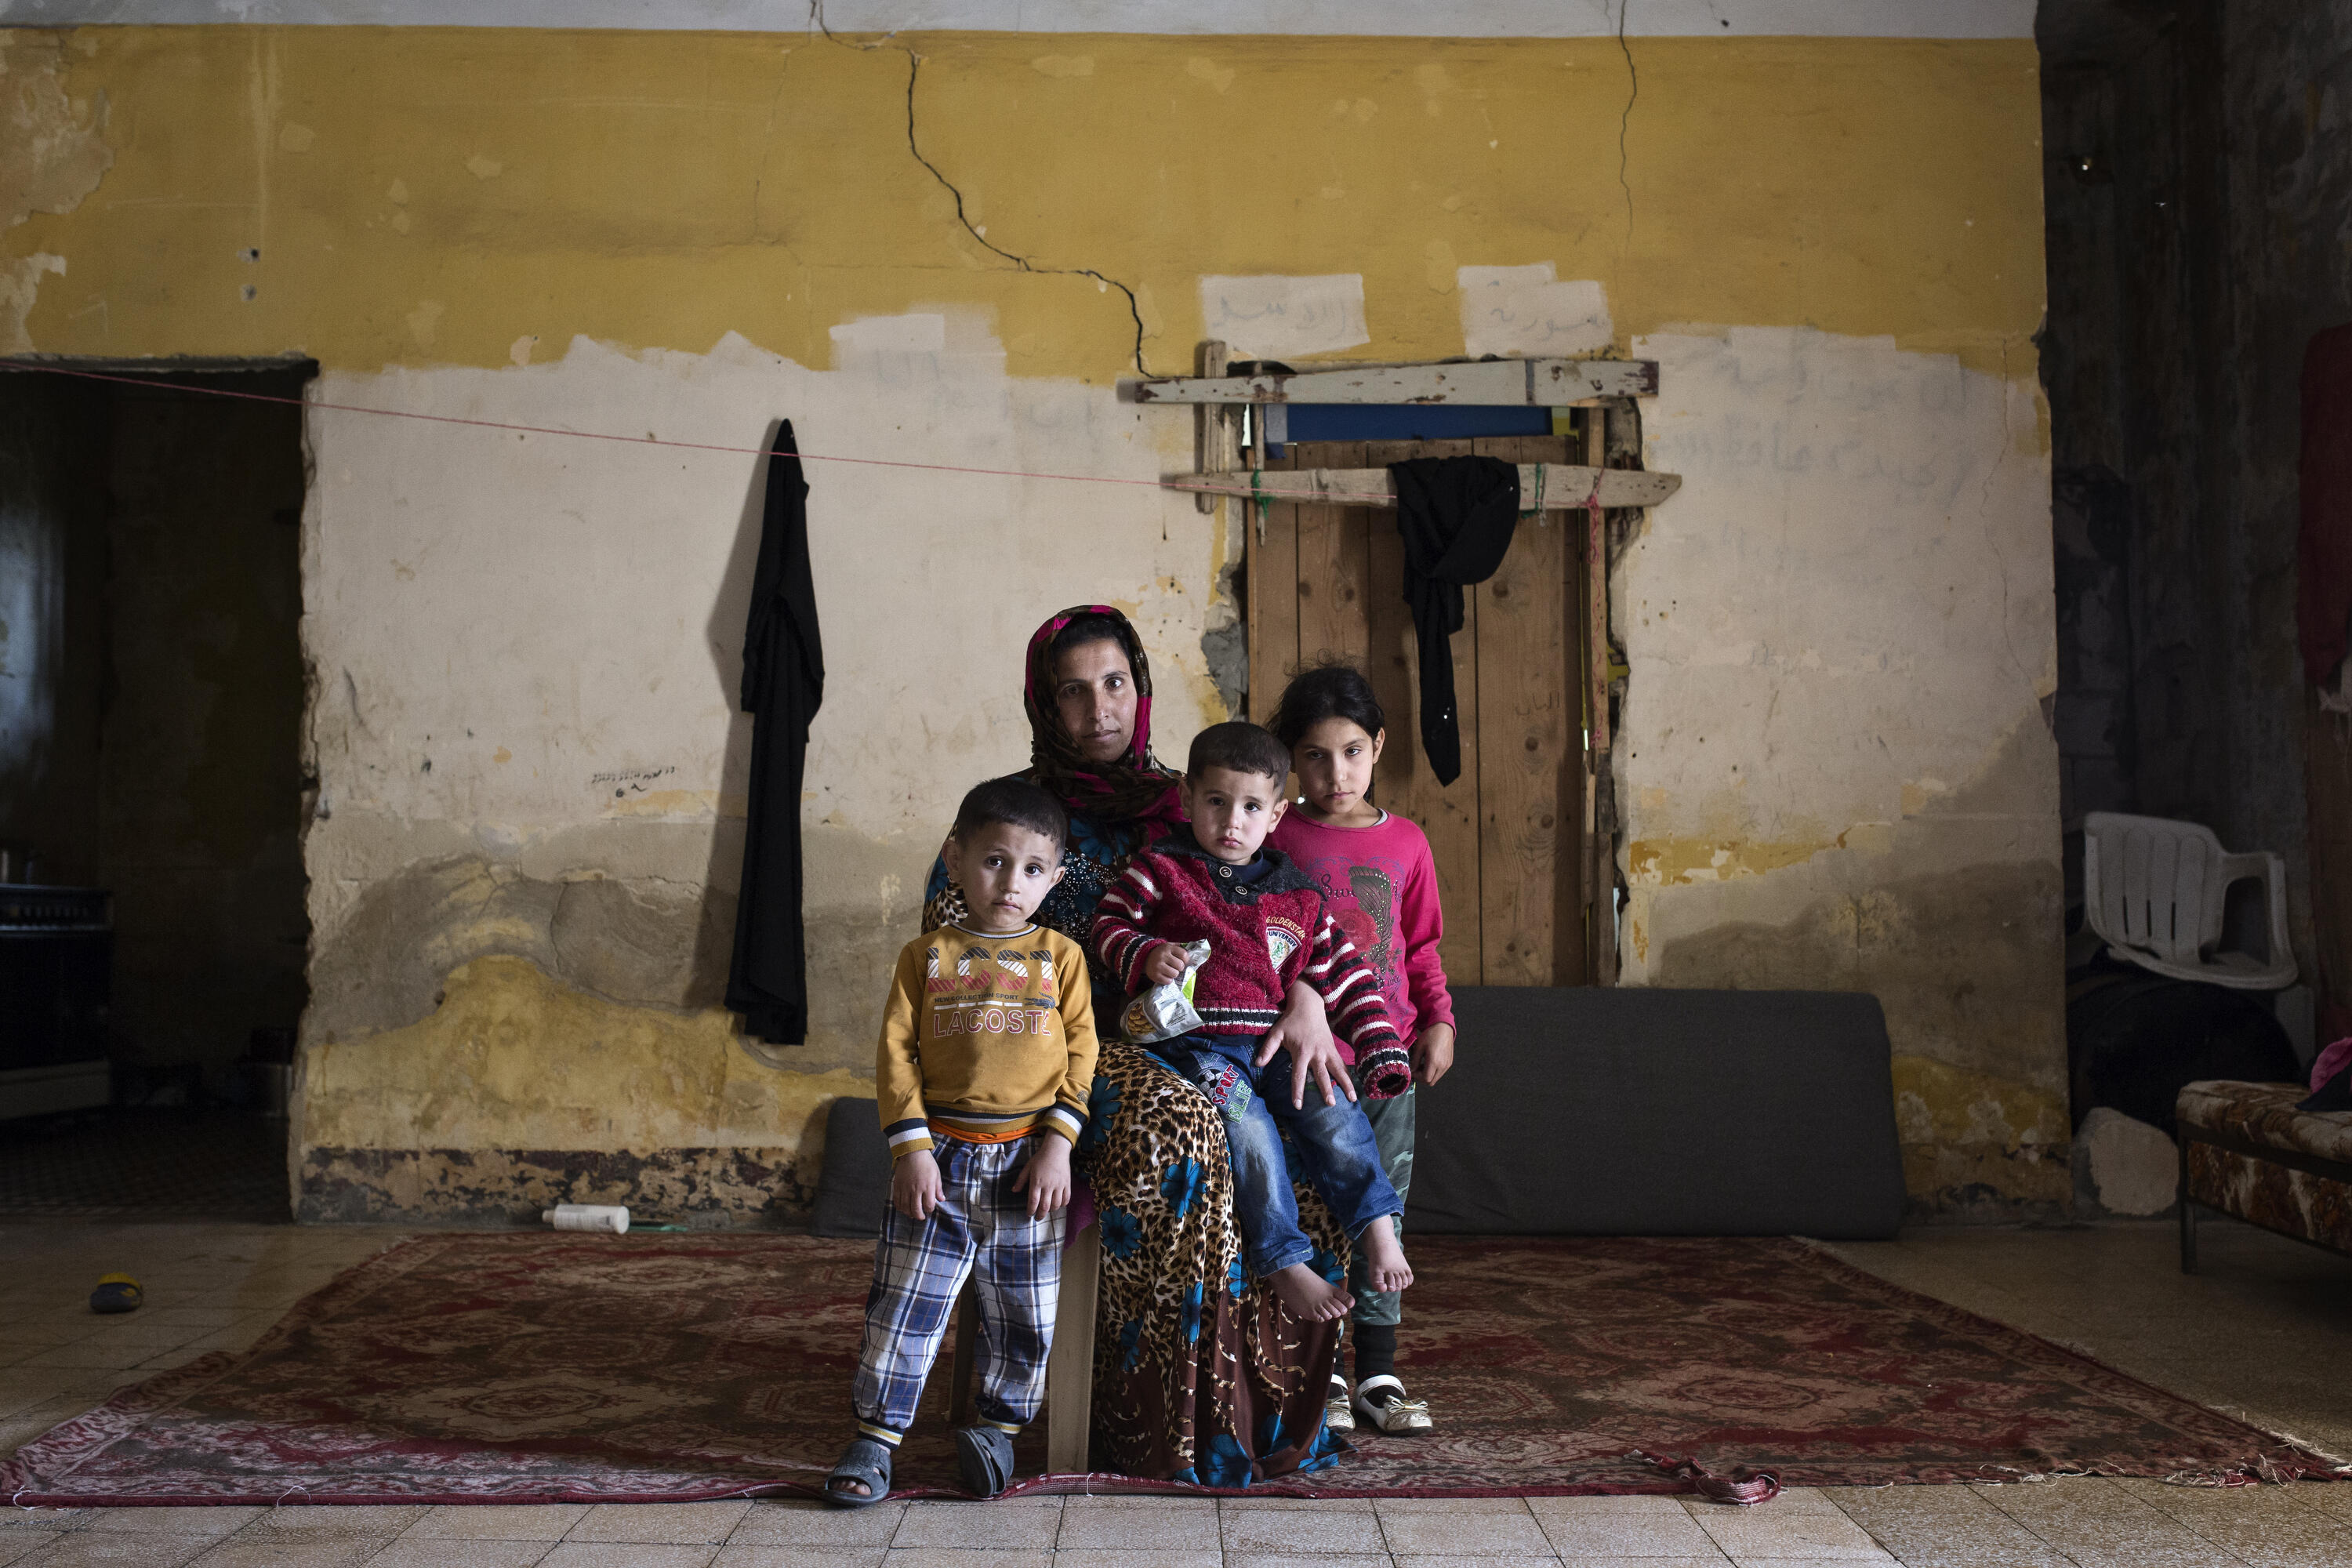 A Syrian mother and three children sit amid rubble in an abandoned building where they live as refugees in Lebanon. 